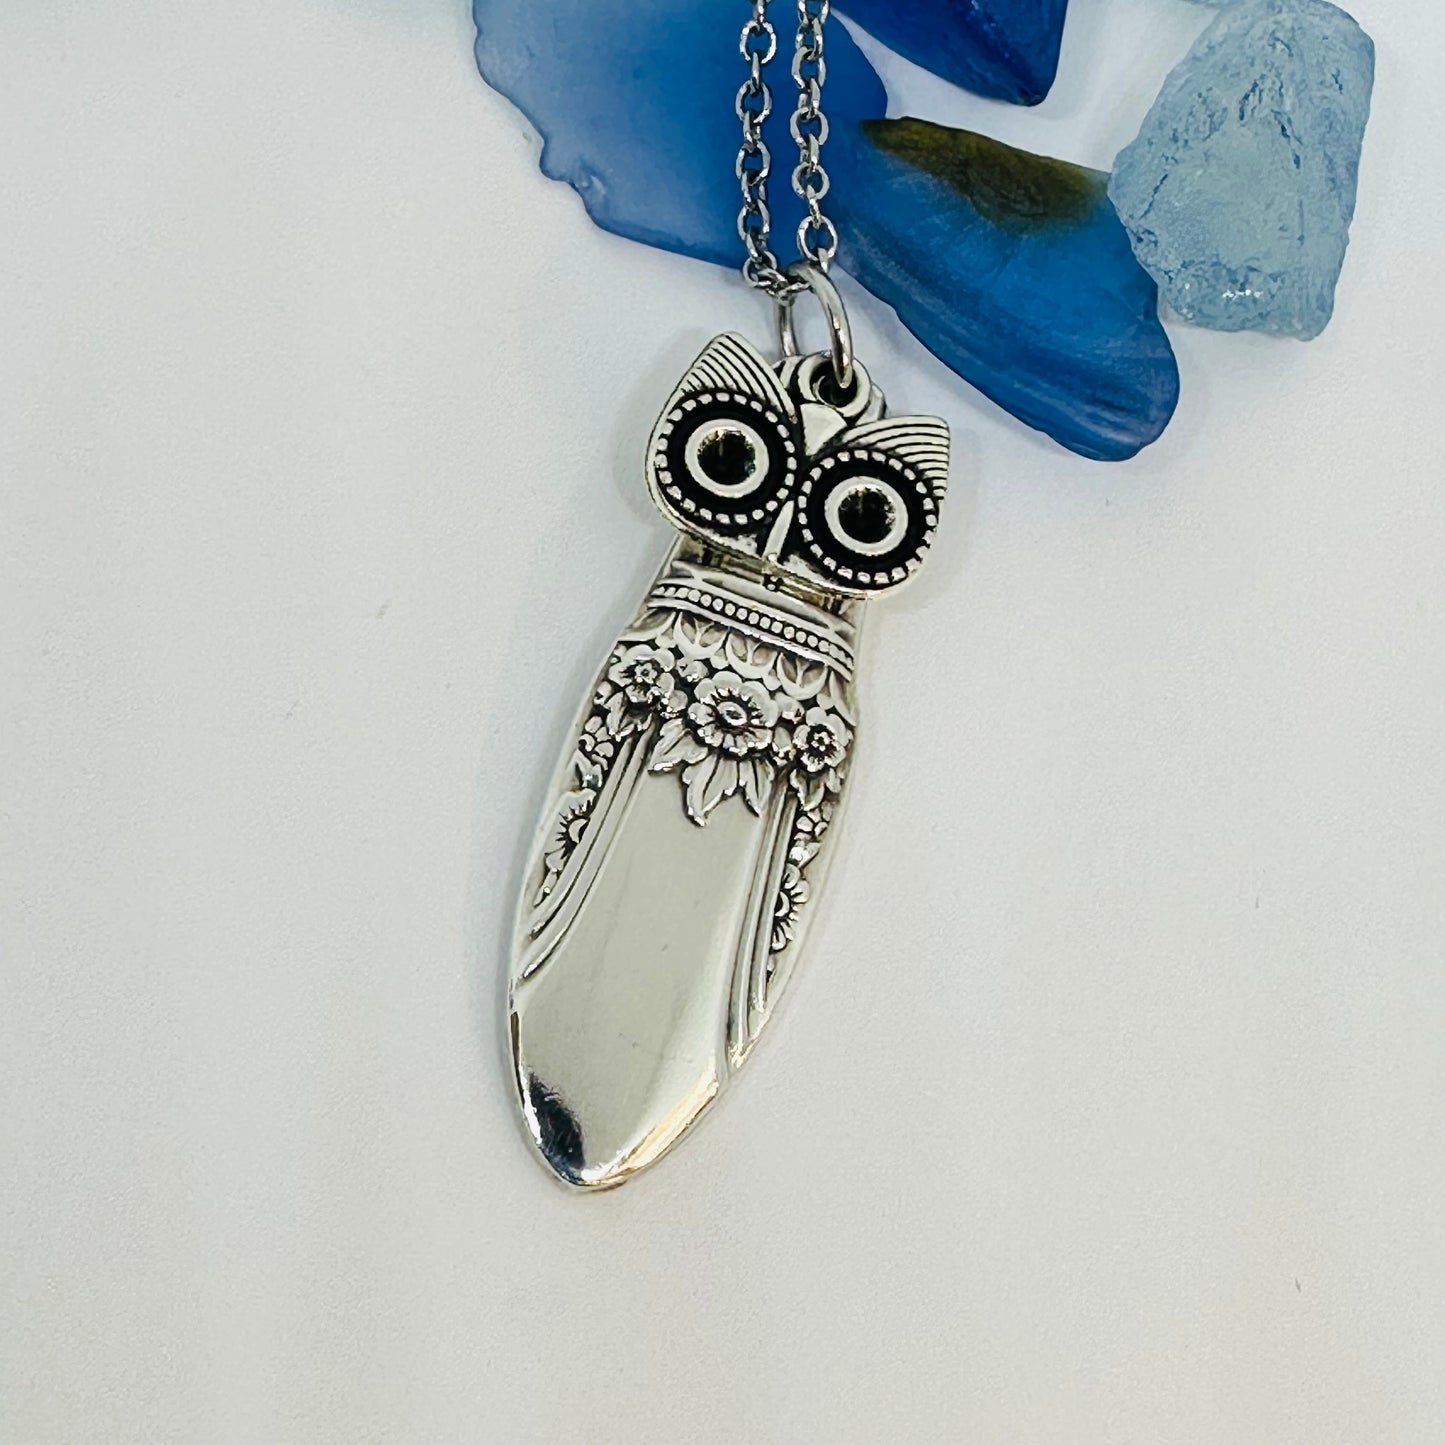 Owl with Birthstone Eyes “First Love” 1937 Vintage Silverware Necklace | Up-Cycled Jewelry | Birthday Pendant | Antique | 2.6mm Swarovski Eyes